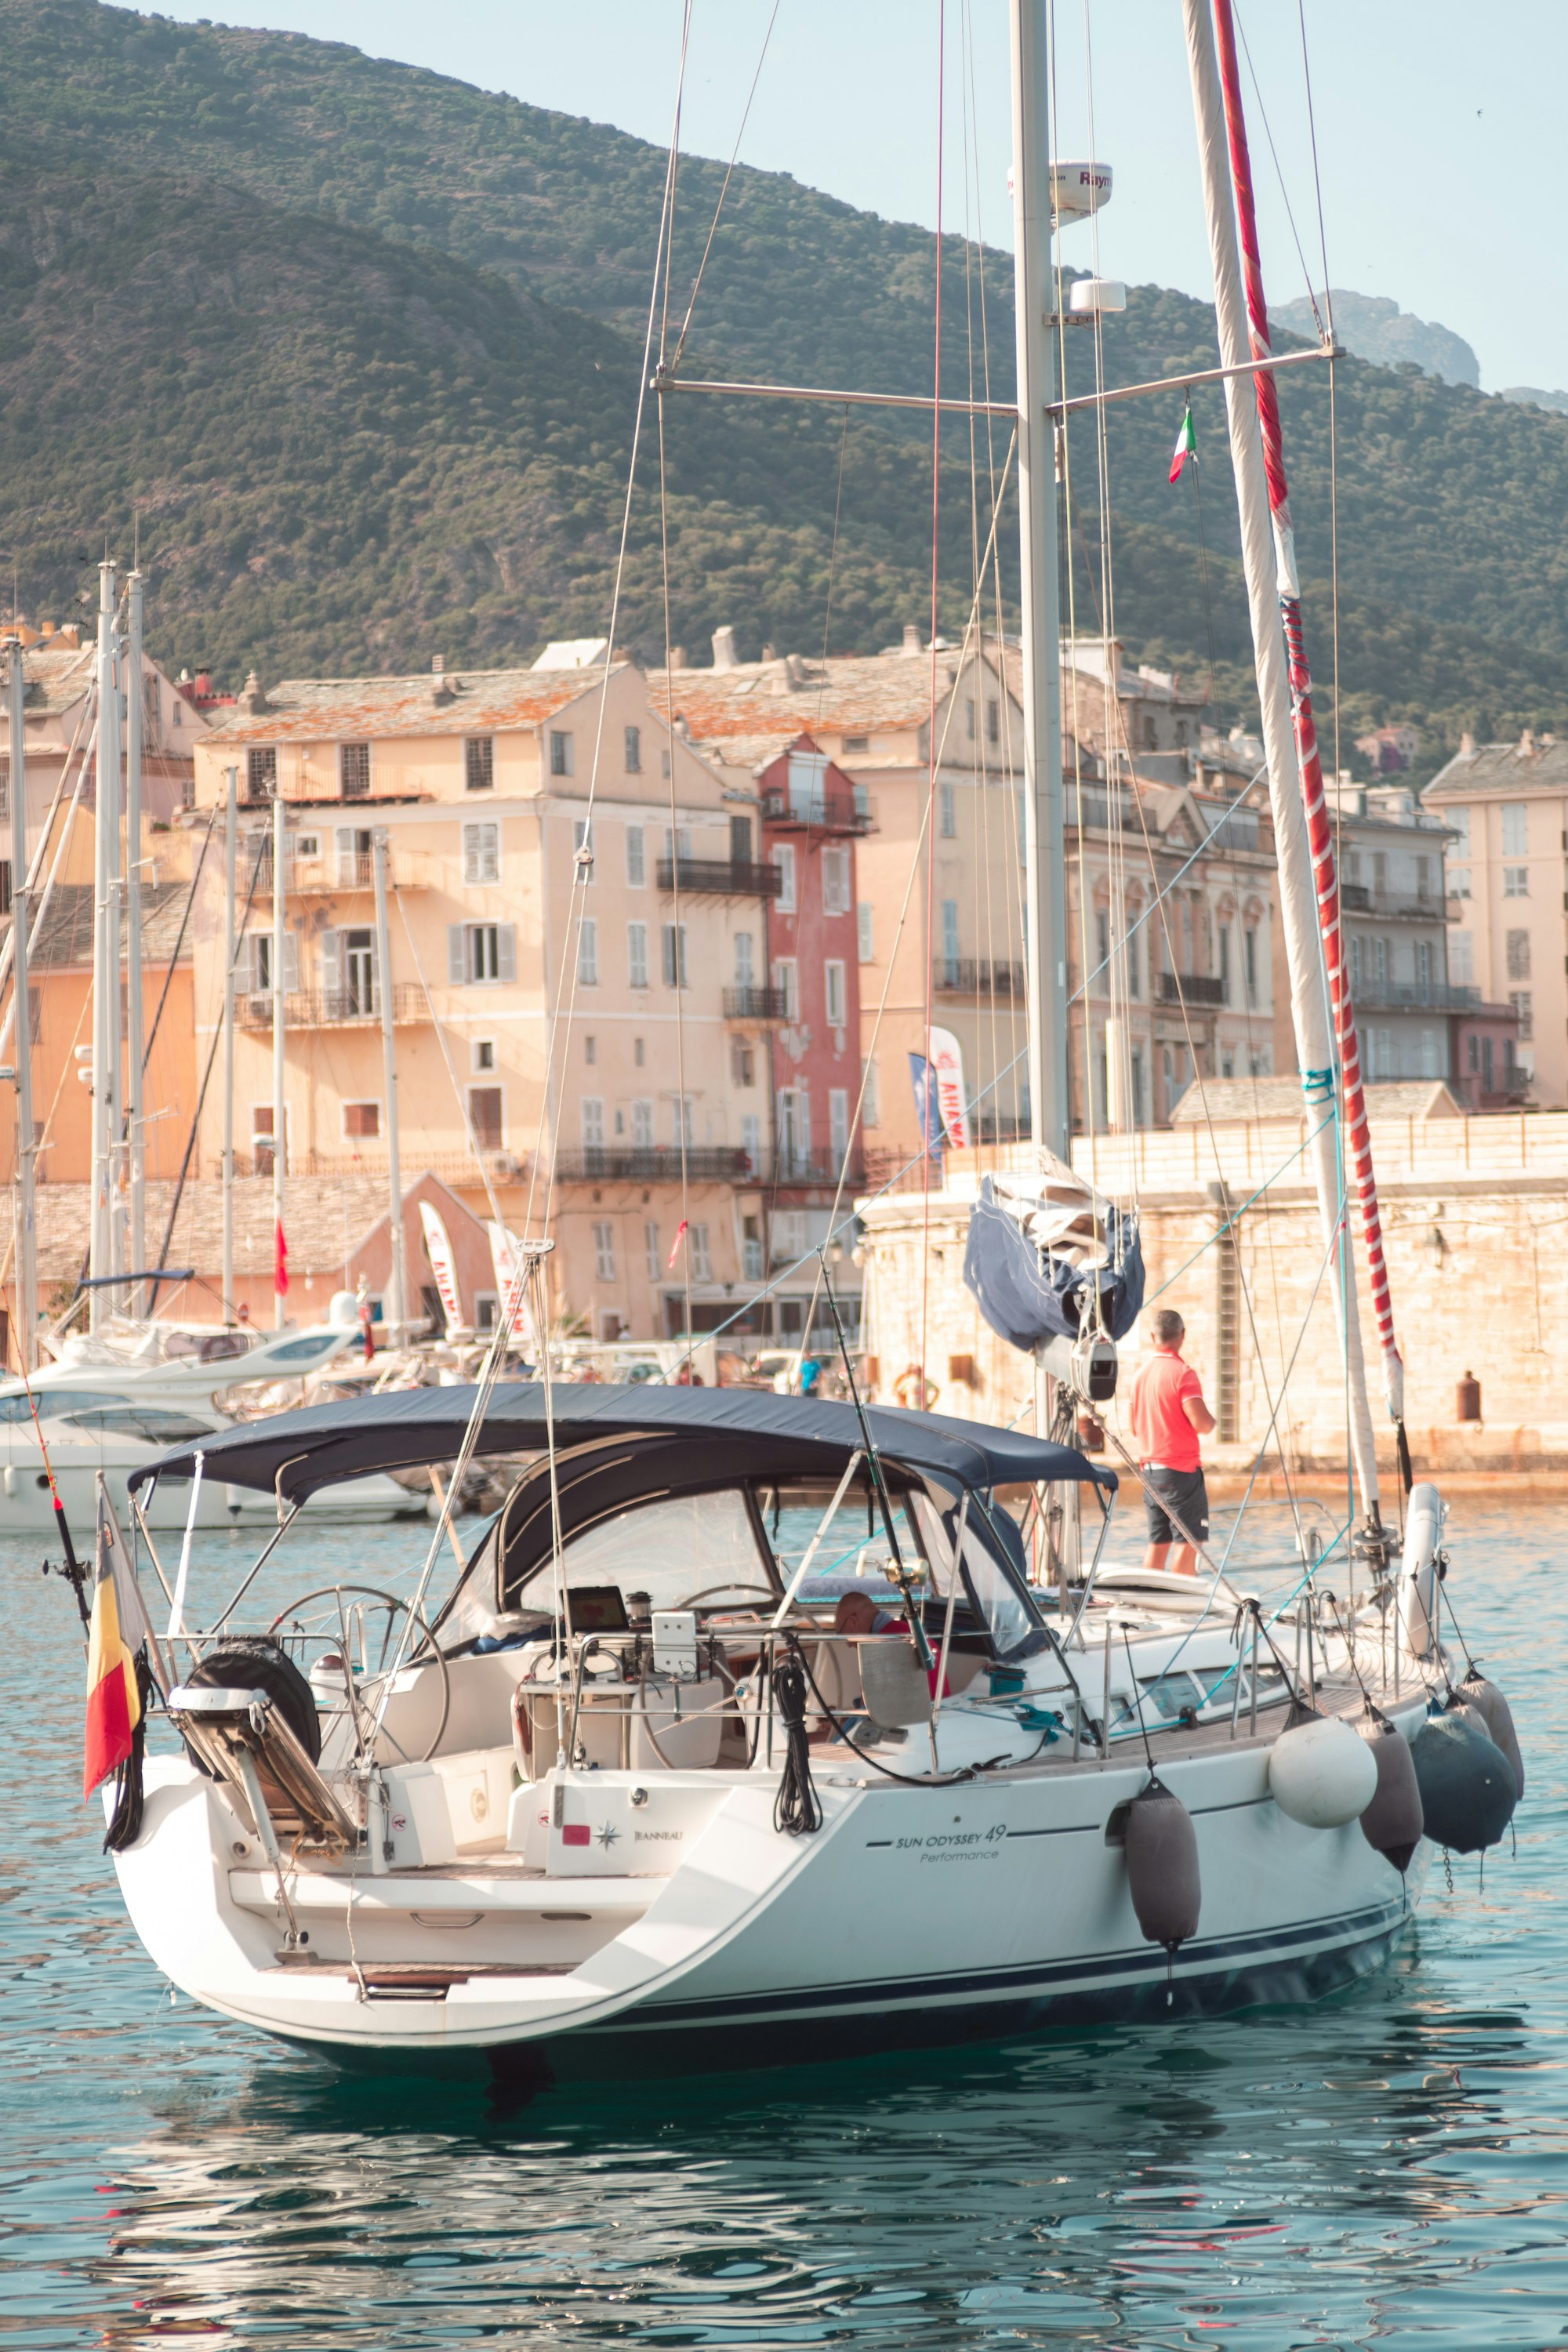 What to See in Bastia: A Local's Guide to Exploring the City